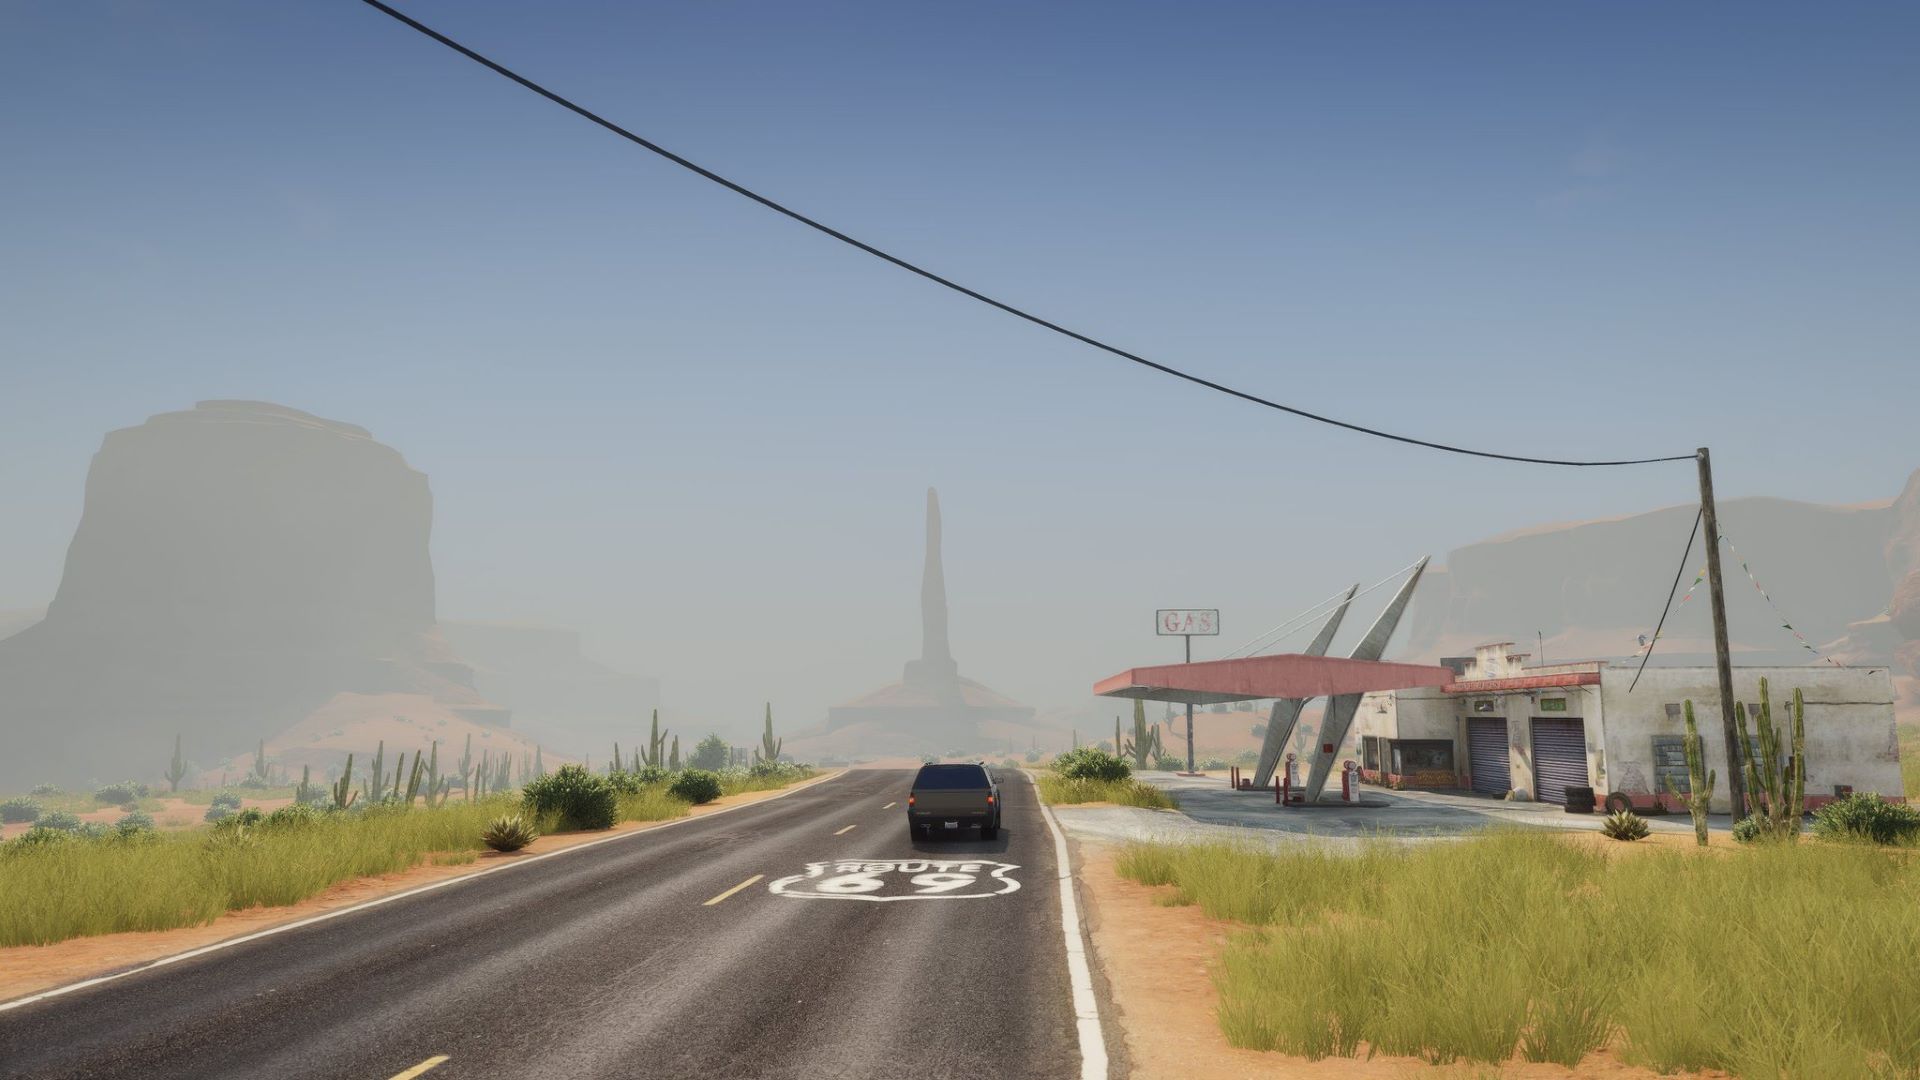 5 iconic GTA San Andreas locations that play a crucial role in the storyline